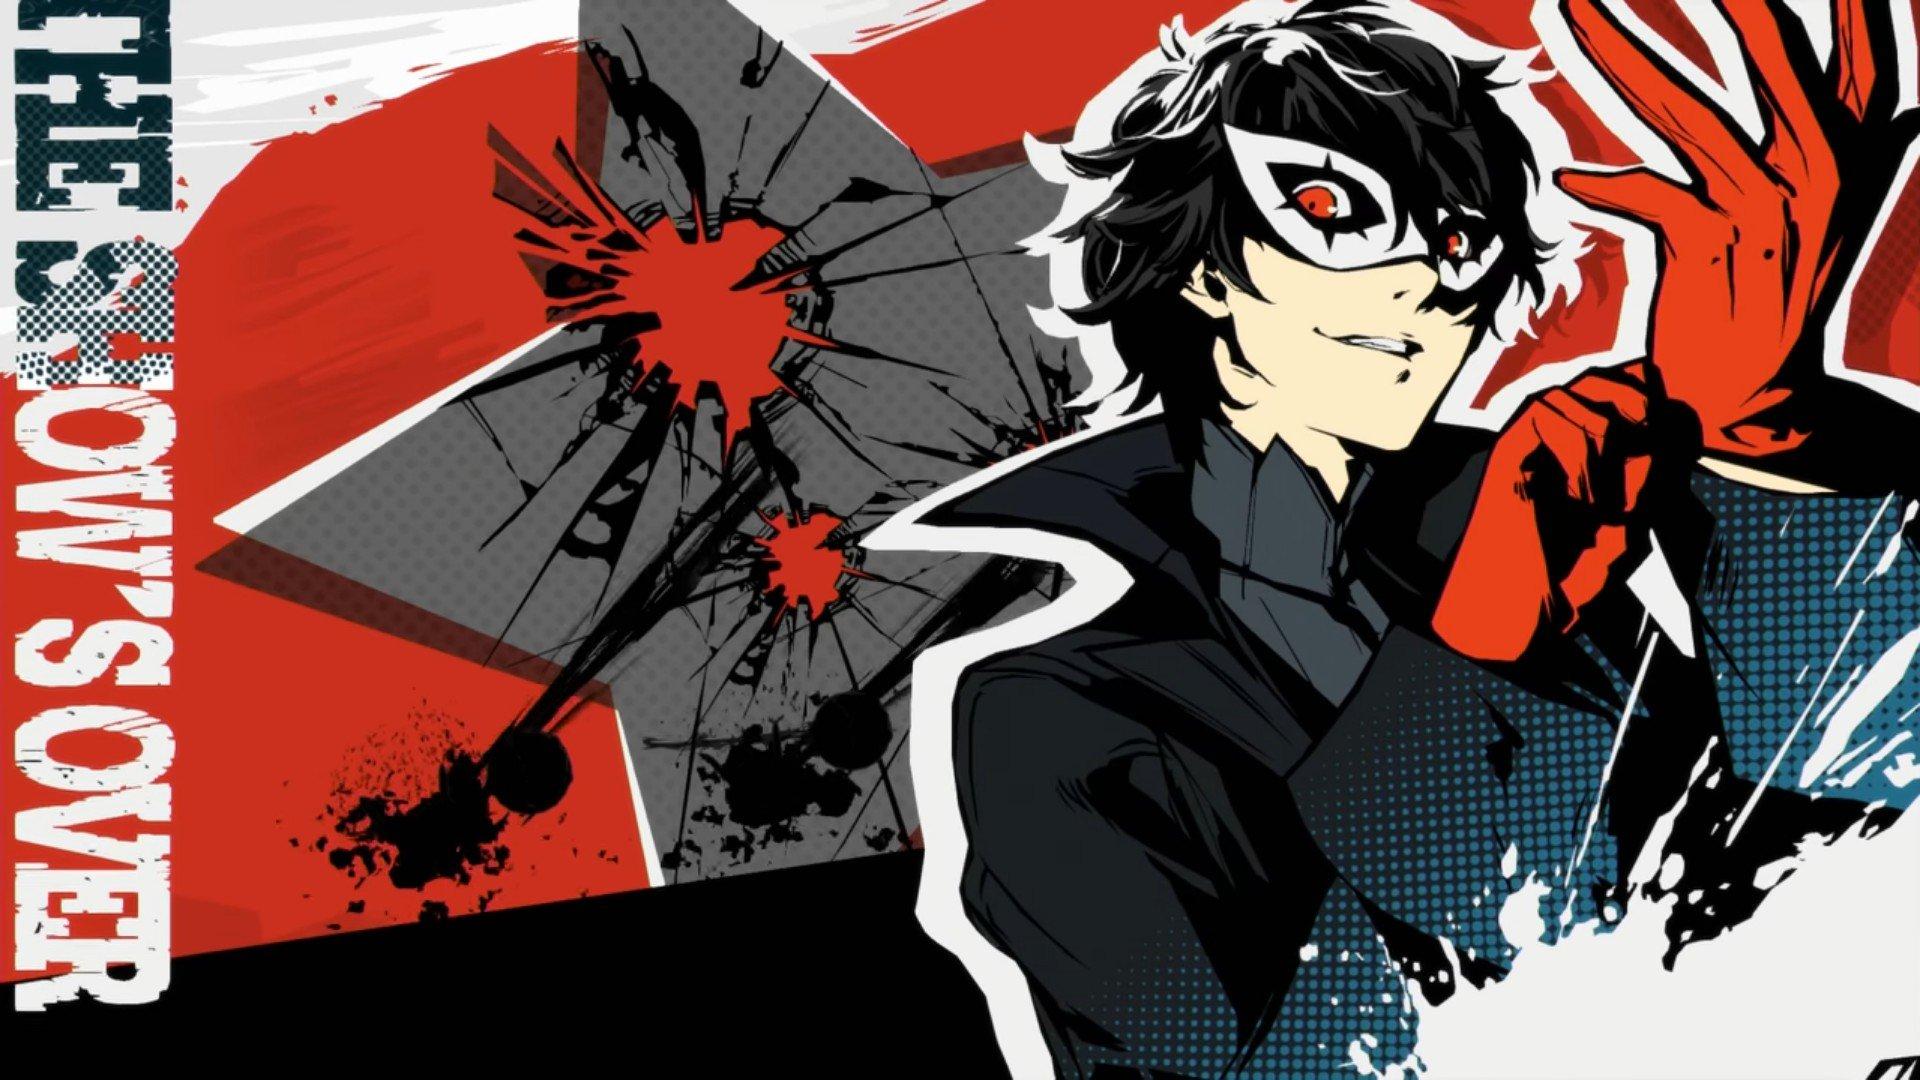 Persona 5 review